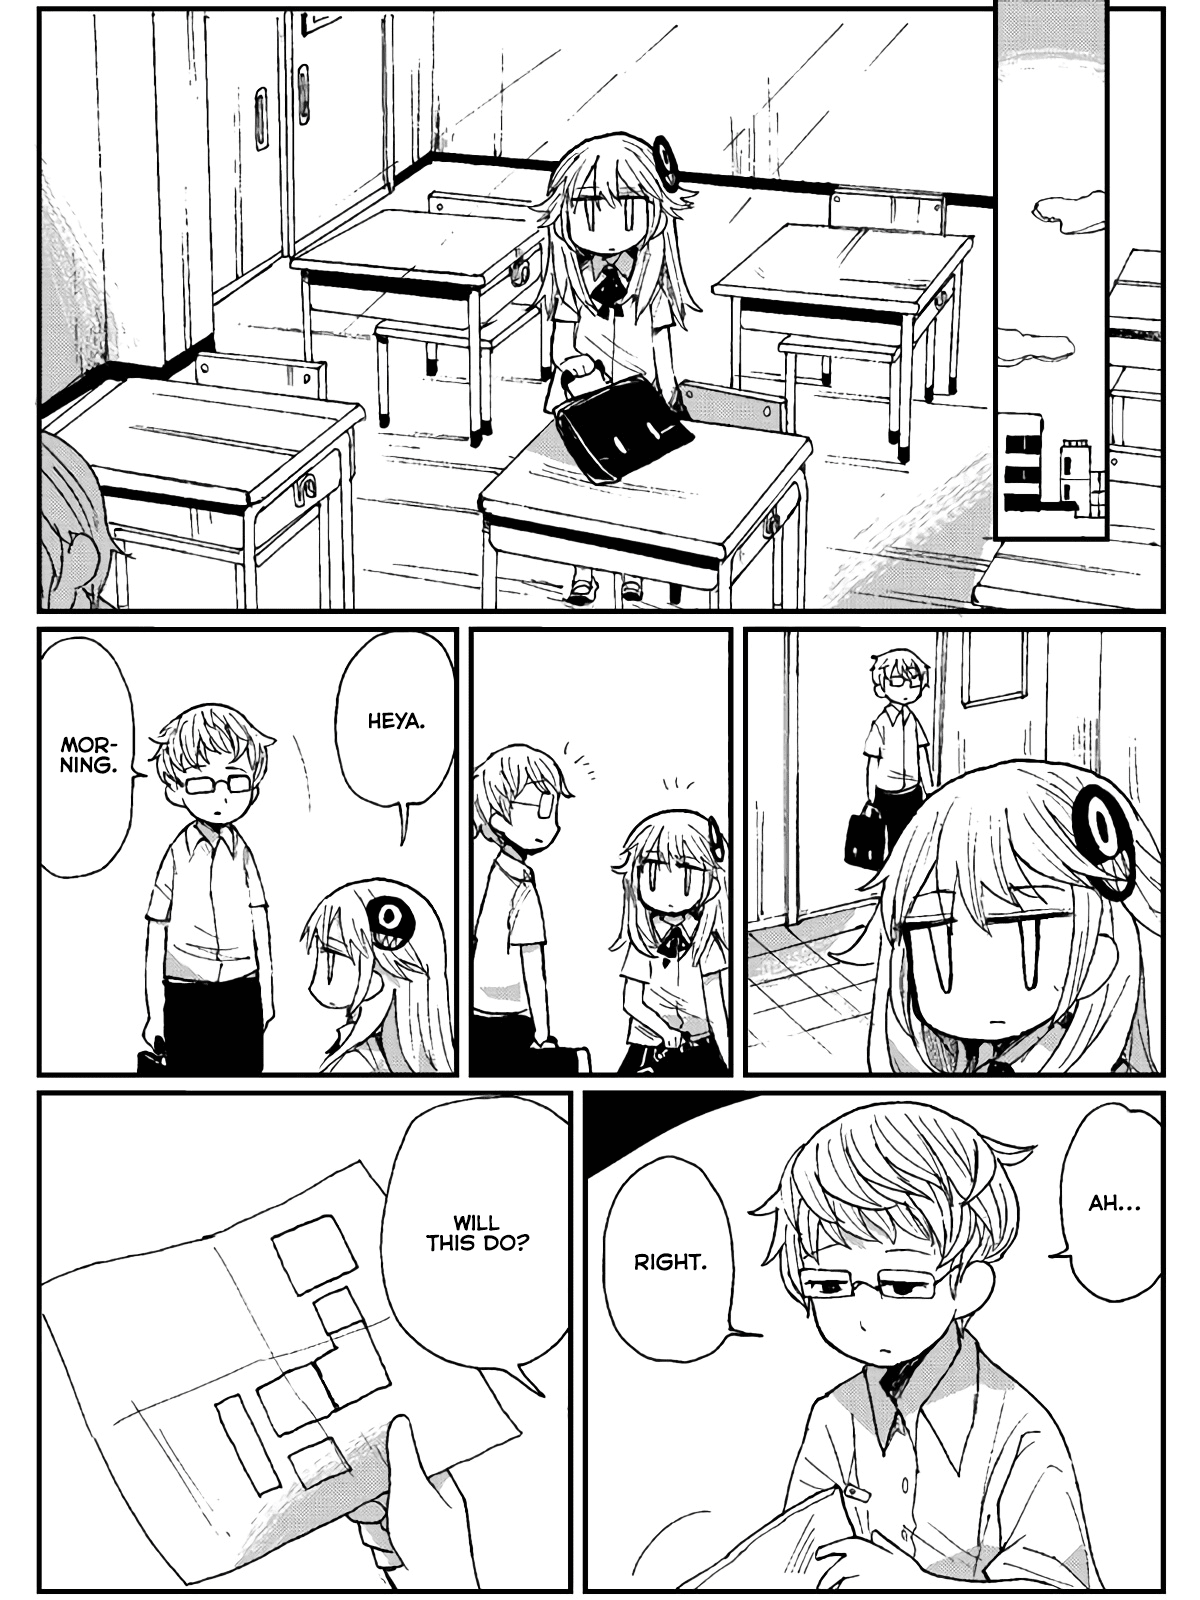 Game Club - Page 1